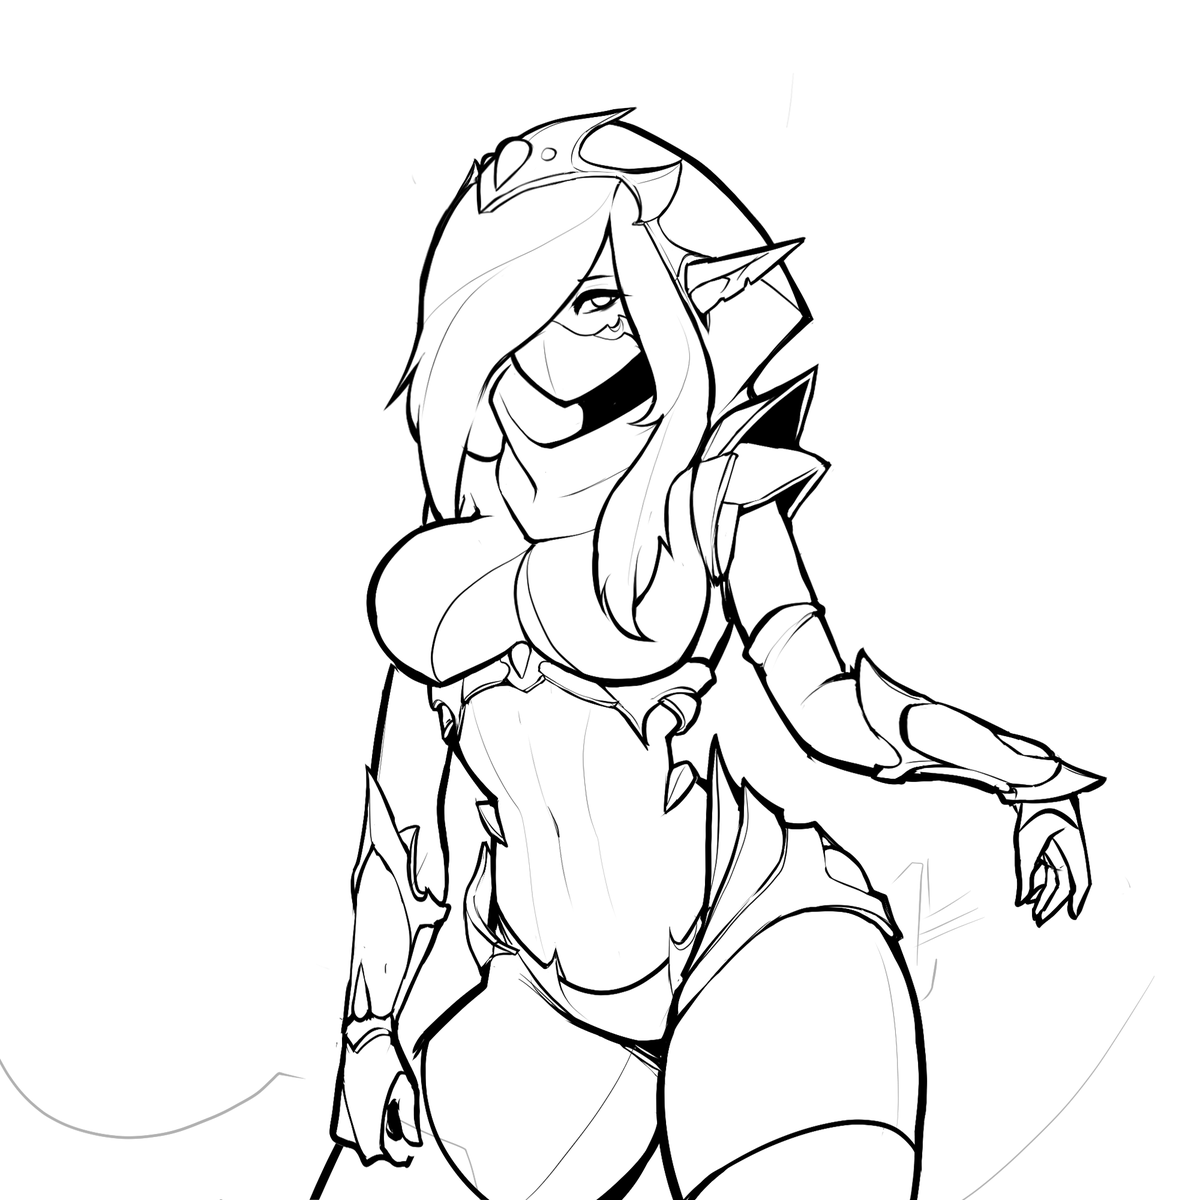 drow ember
this ones been sitting in wip for a while